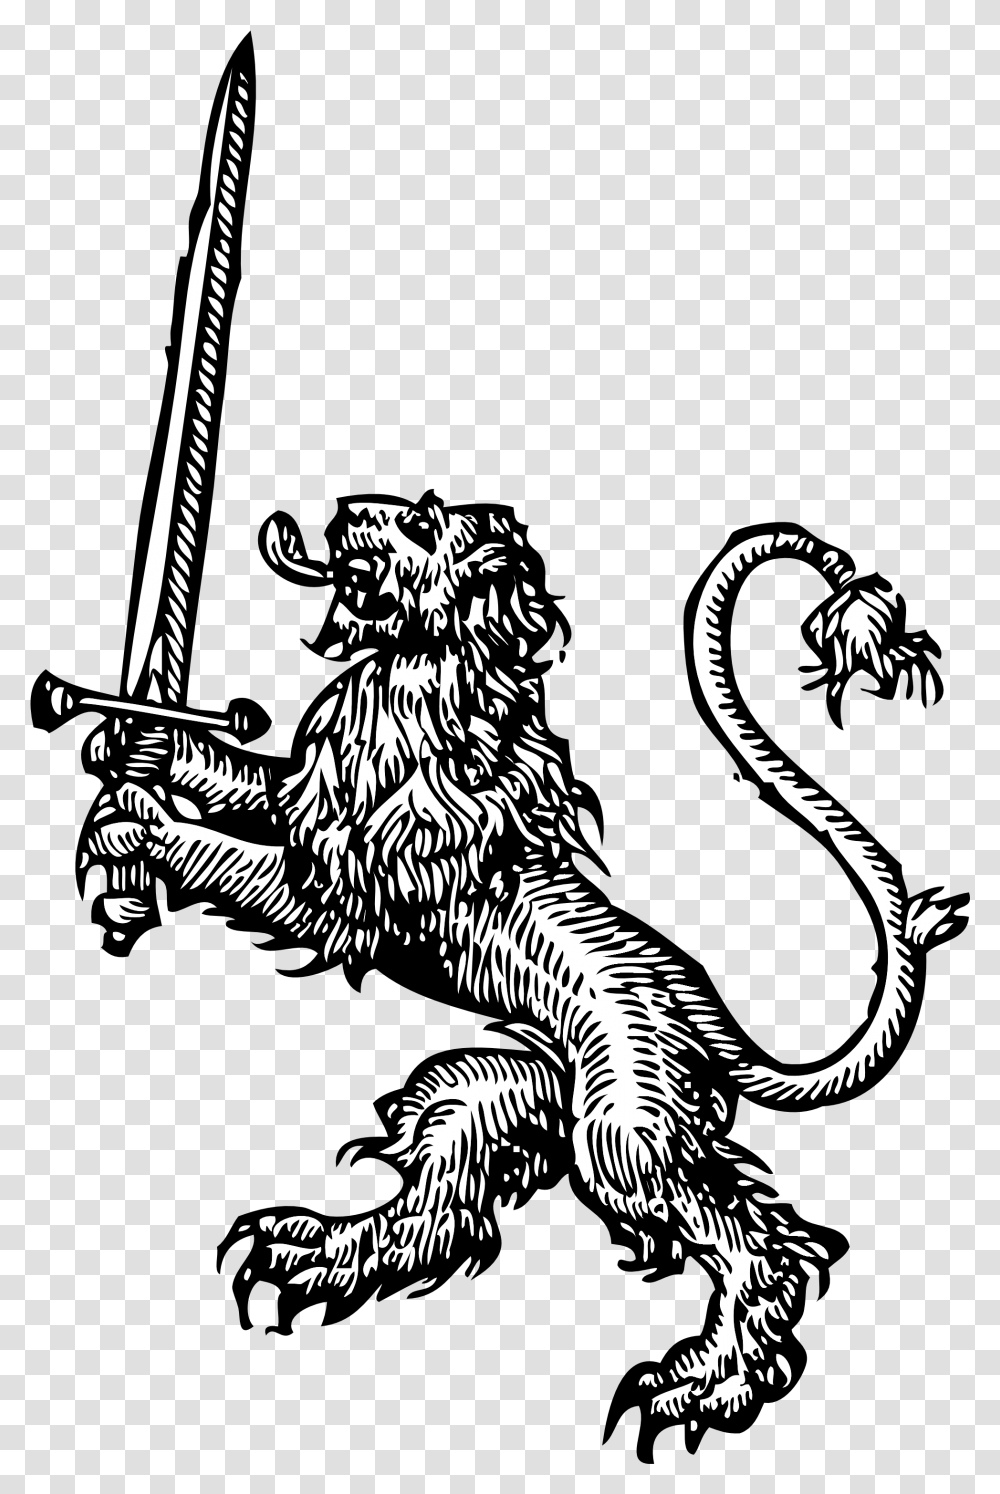 Lion With Sword Black White Line Art Tatoo Tattoo Svg Lion Rampant With Sword, Animal, Reptile Transparent Png